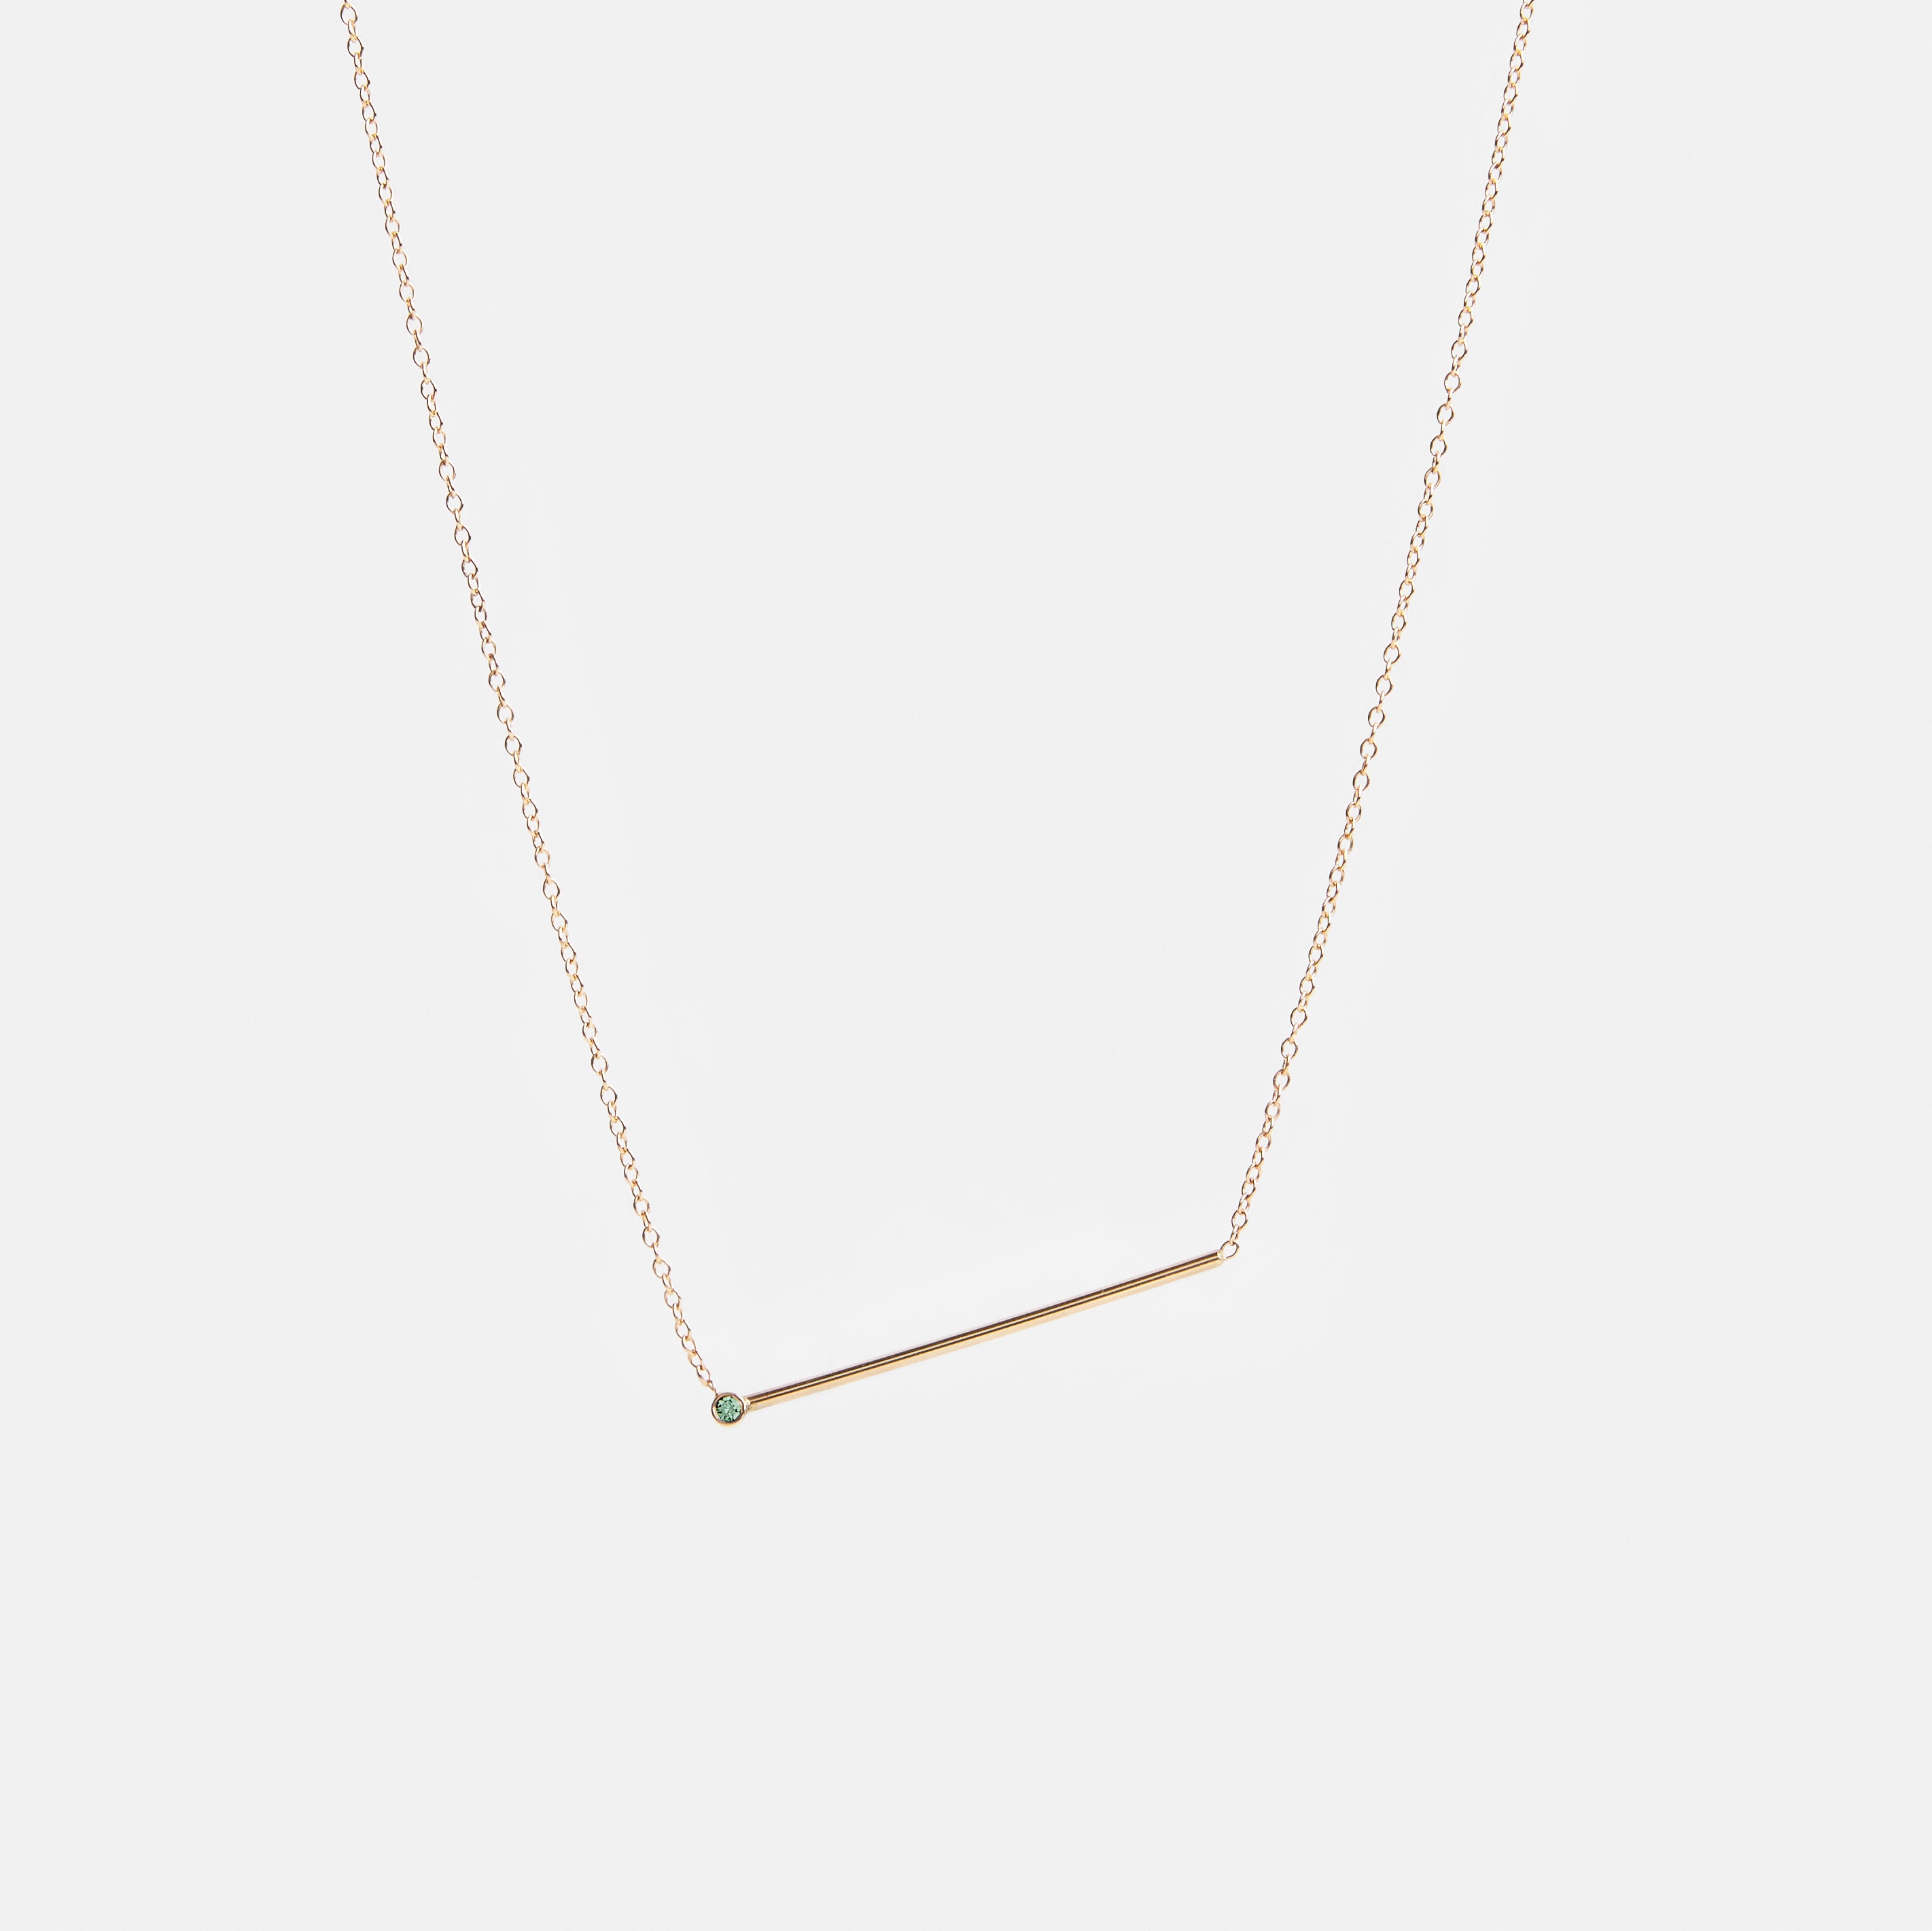 Enne Simple Necklace in 14k Gold set with Emerald SHW Fine Jewelry NYC